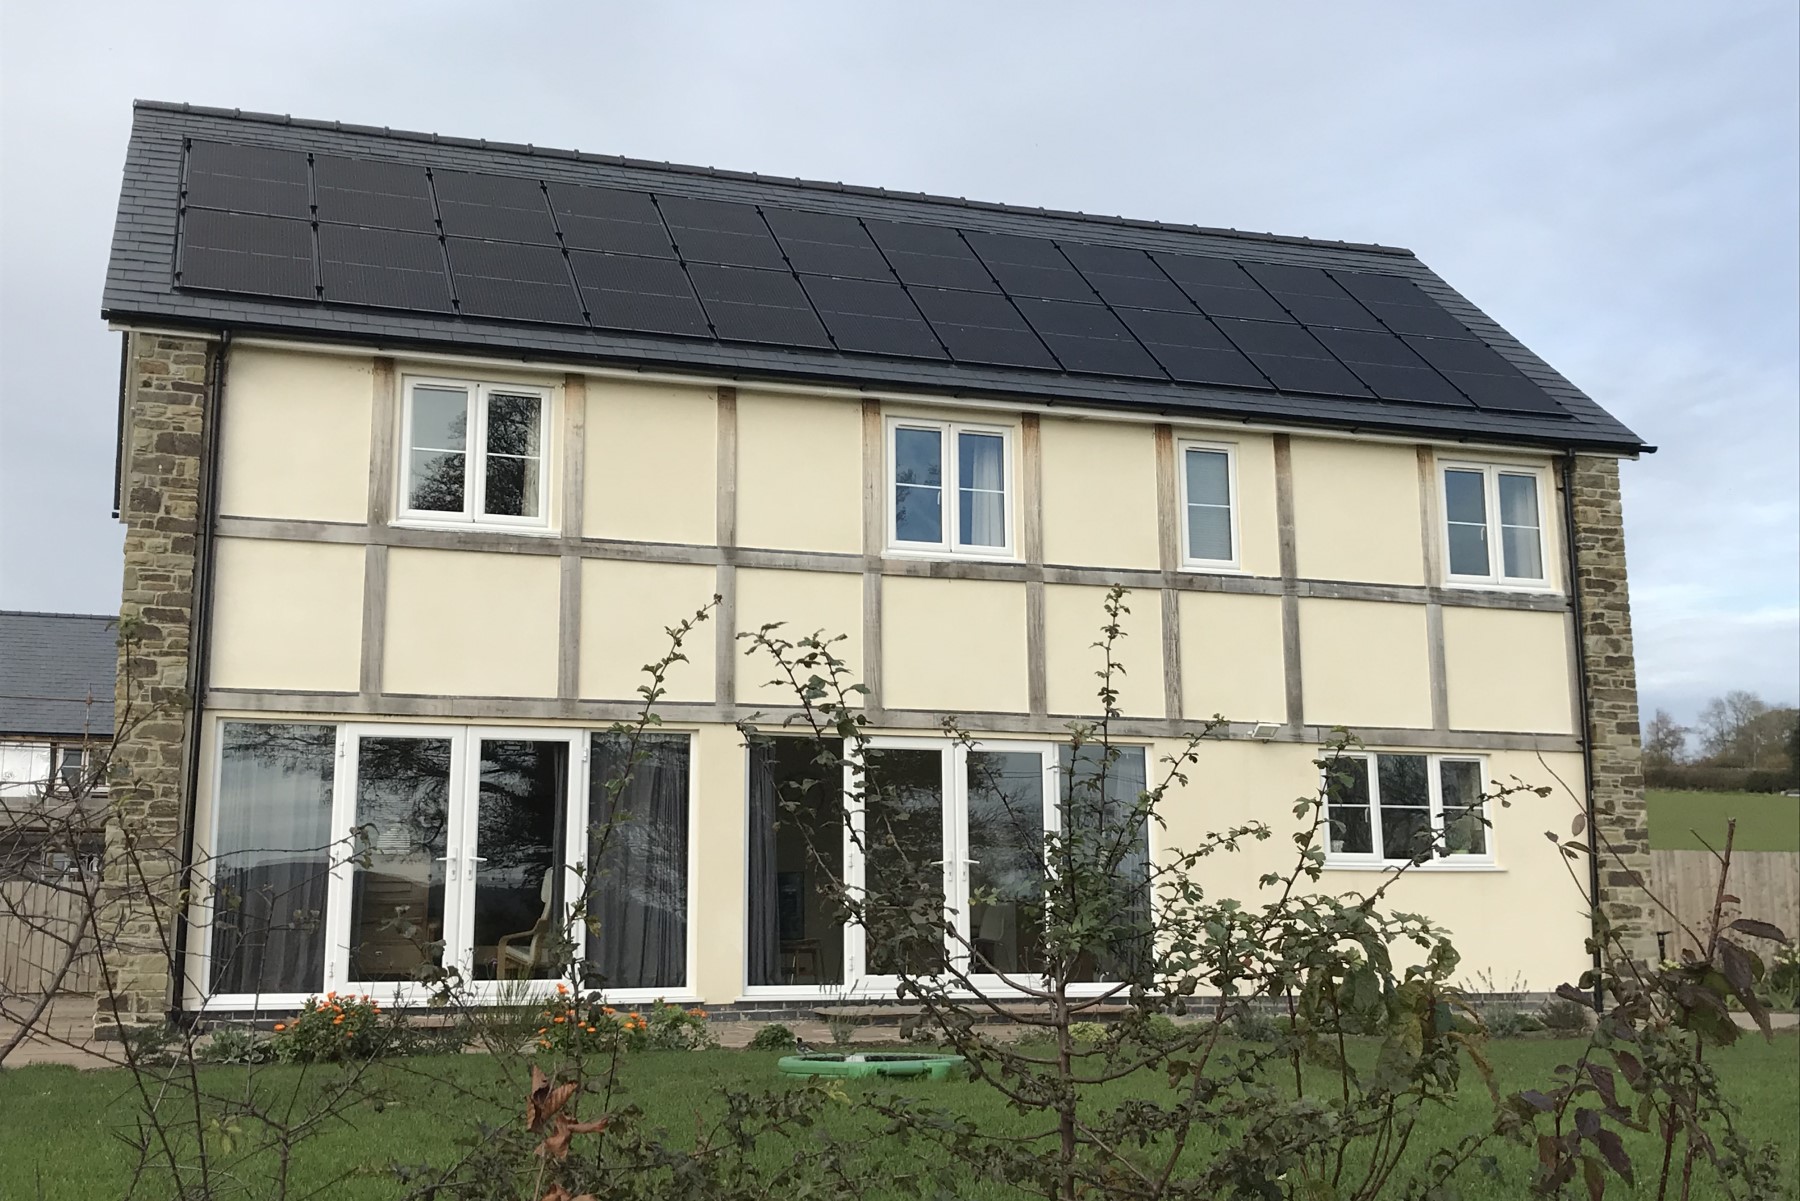 Solar panels integrated into a slate roof